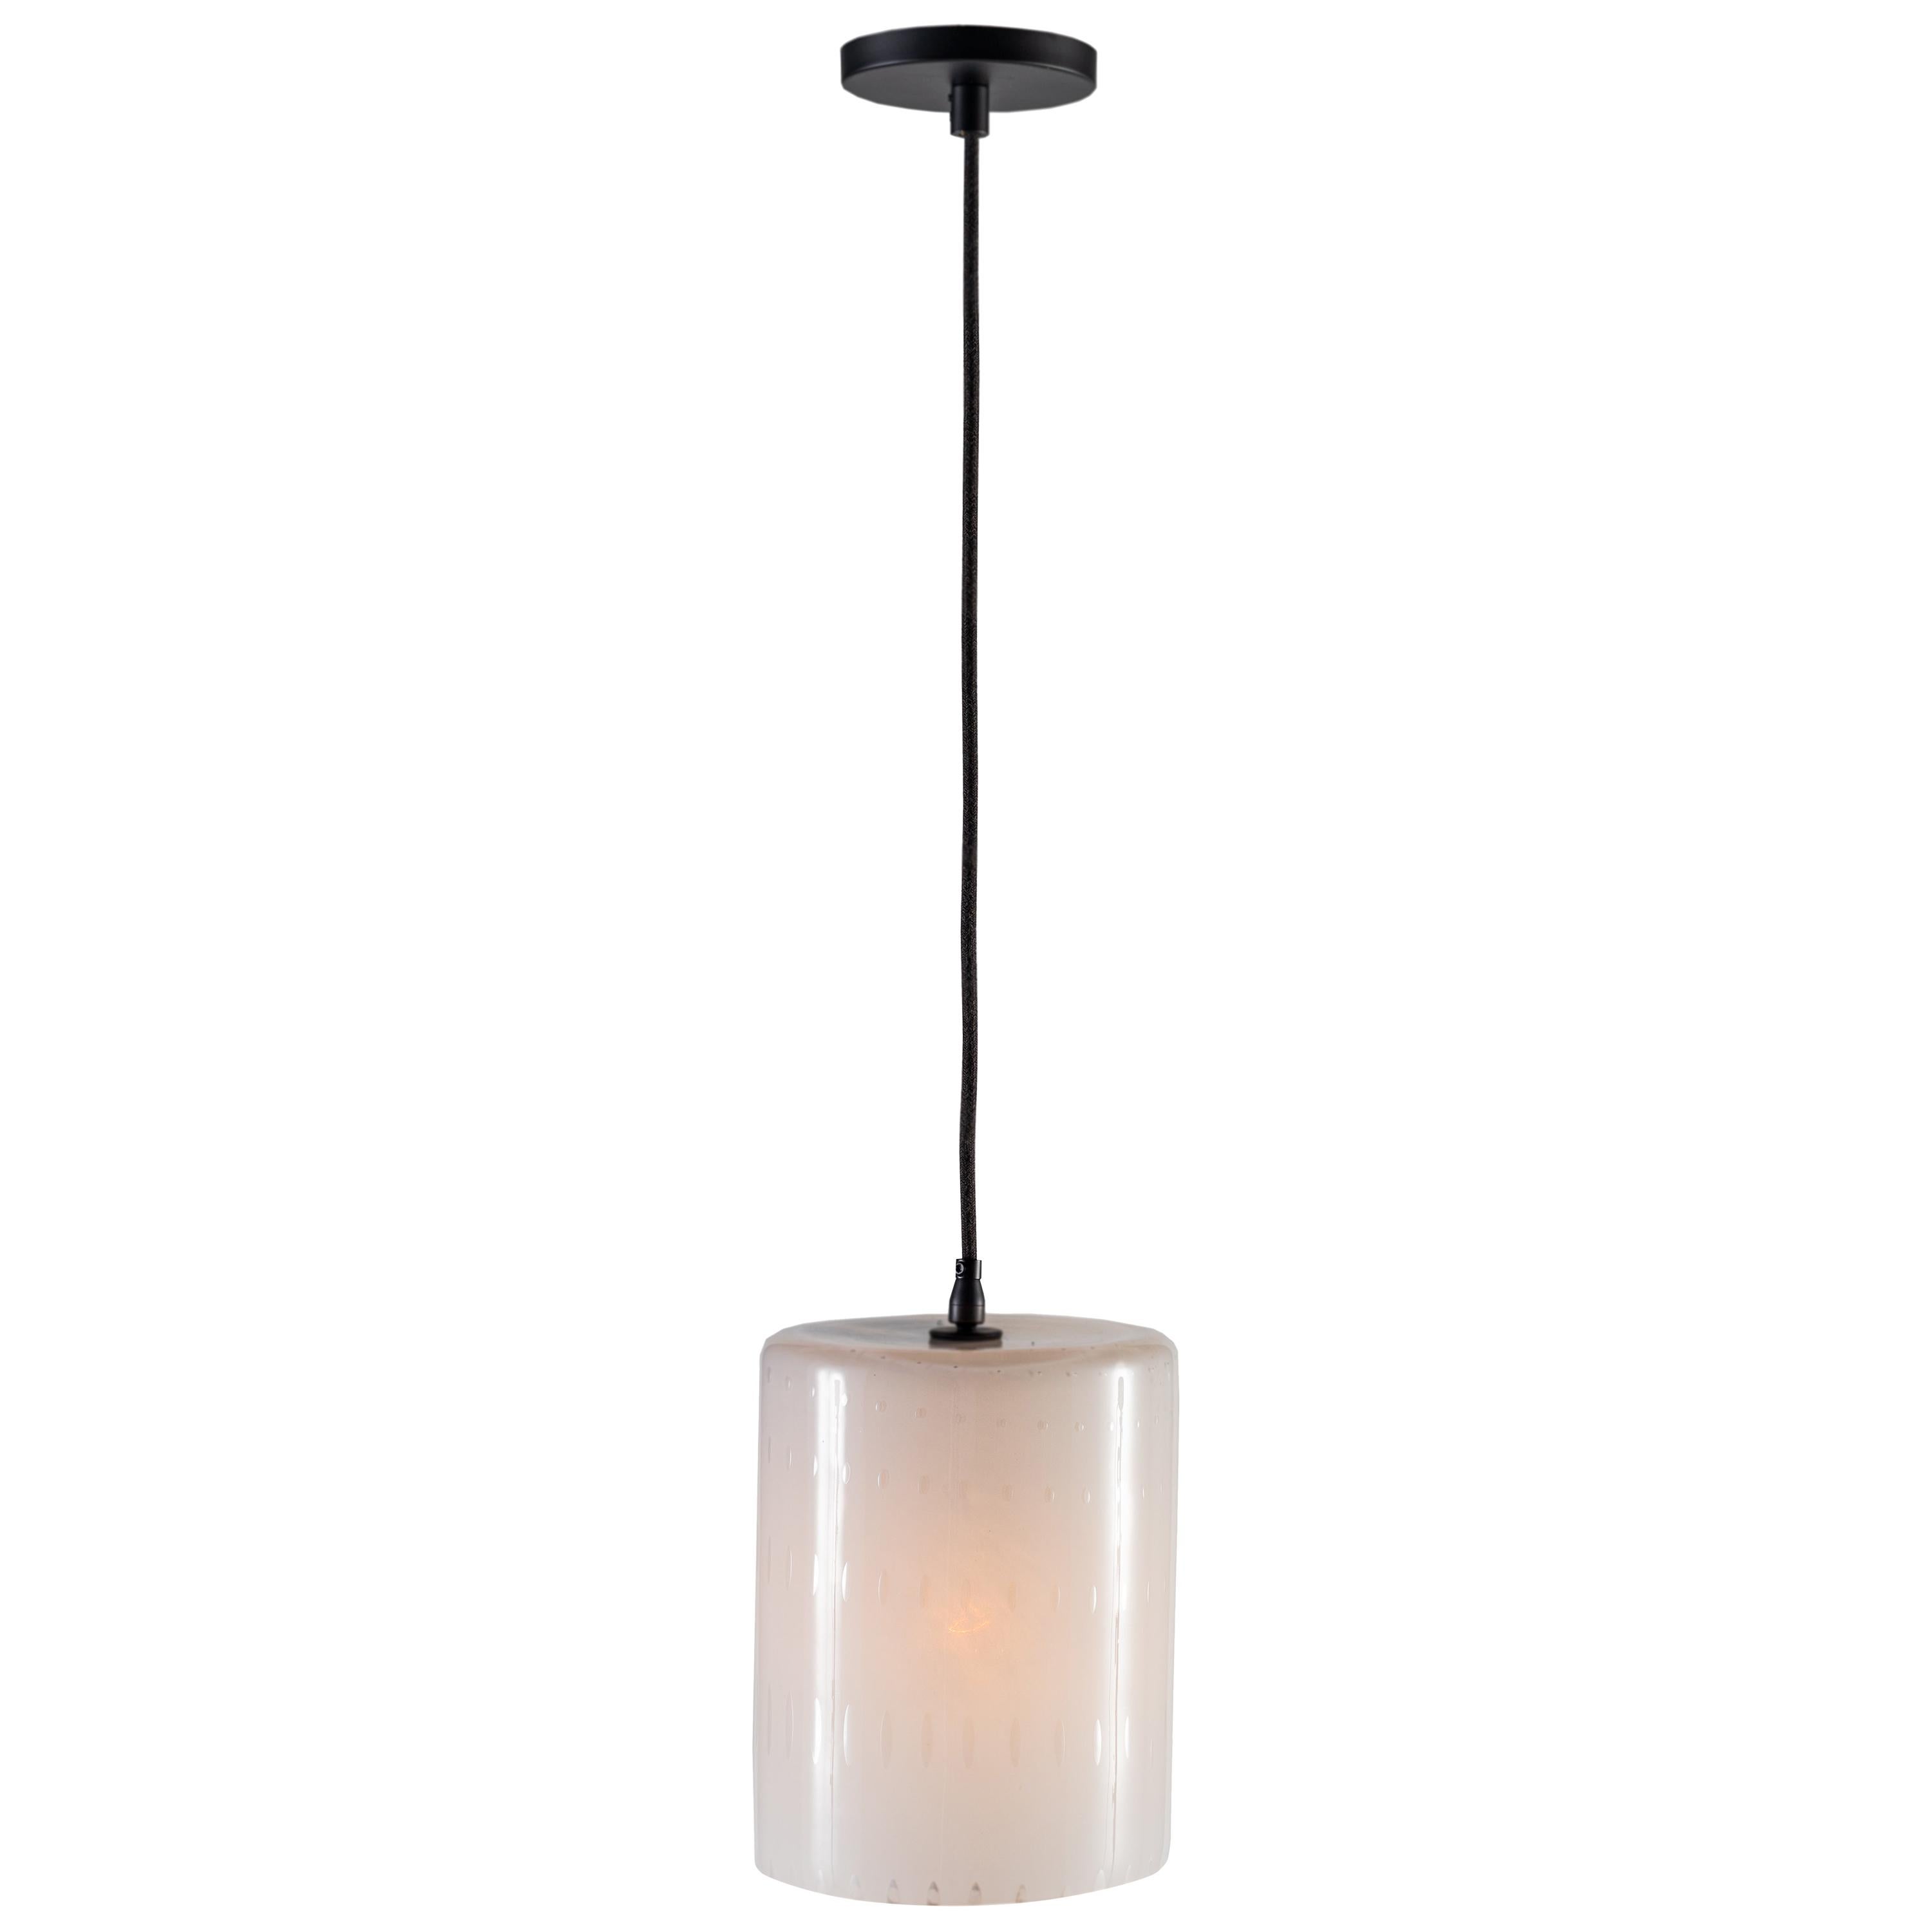 RENG, Flake, Decorative Glass, Cylindrical Pendant with Variegated Opaque Tones